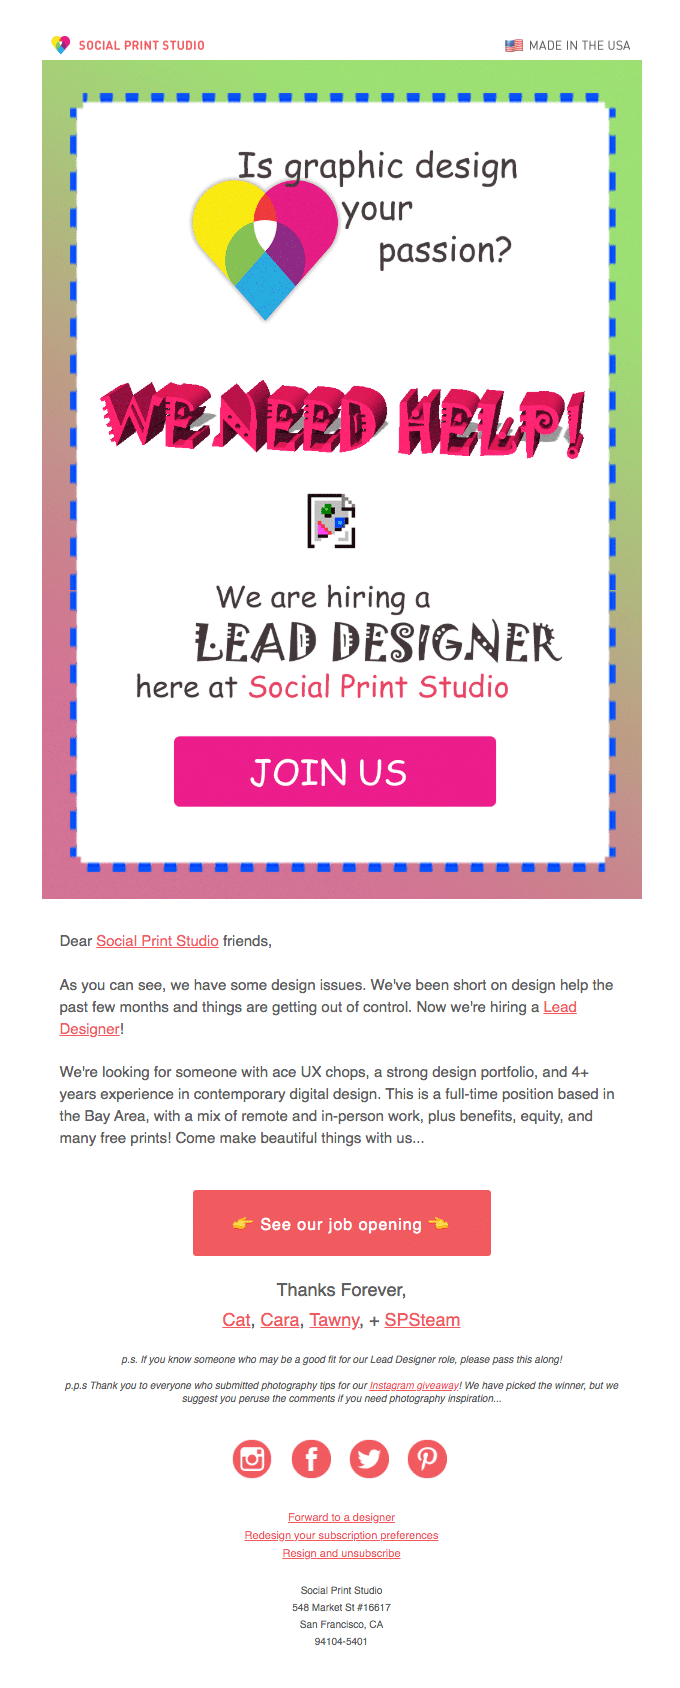 Example of a hiring email from Social Print Studio.